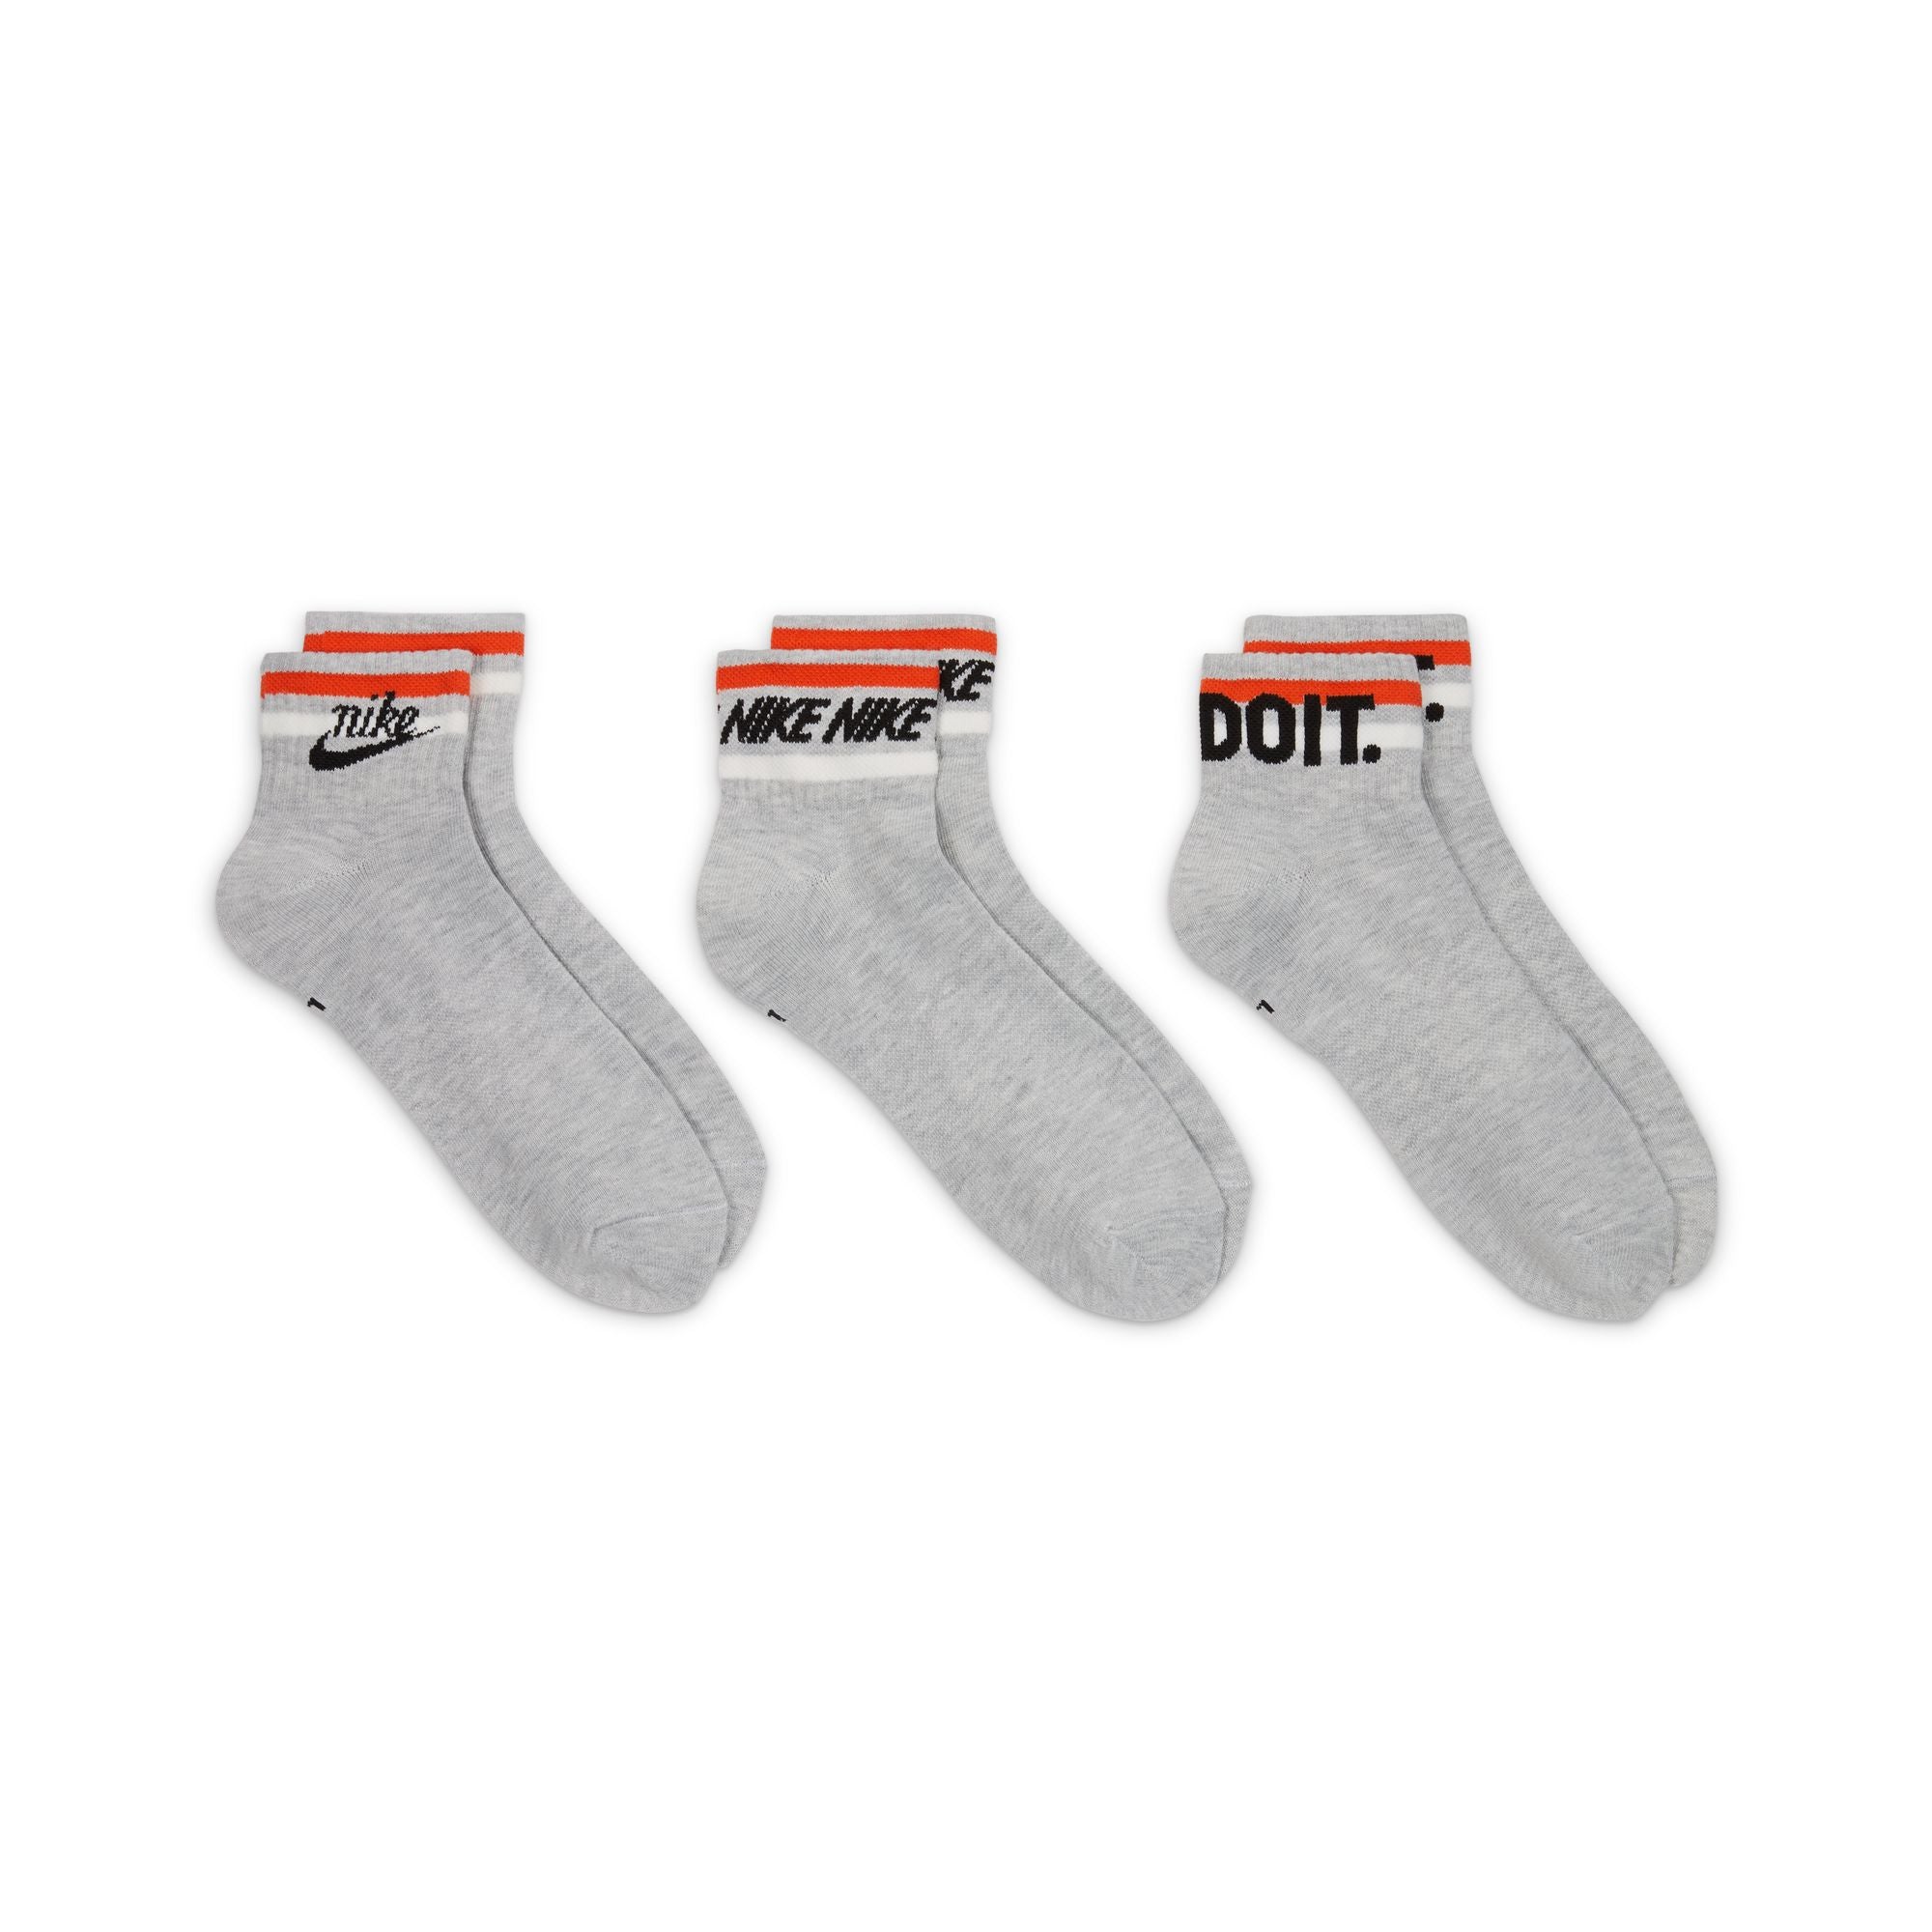 Grey nike ankle socks with red and white stripes and black nike swoosh logo. Free uk shipping over £50